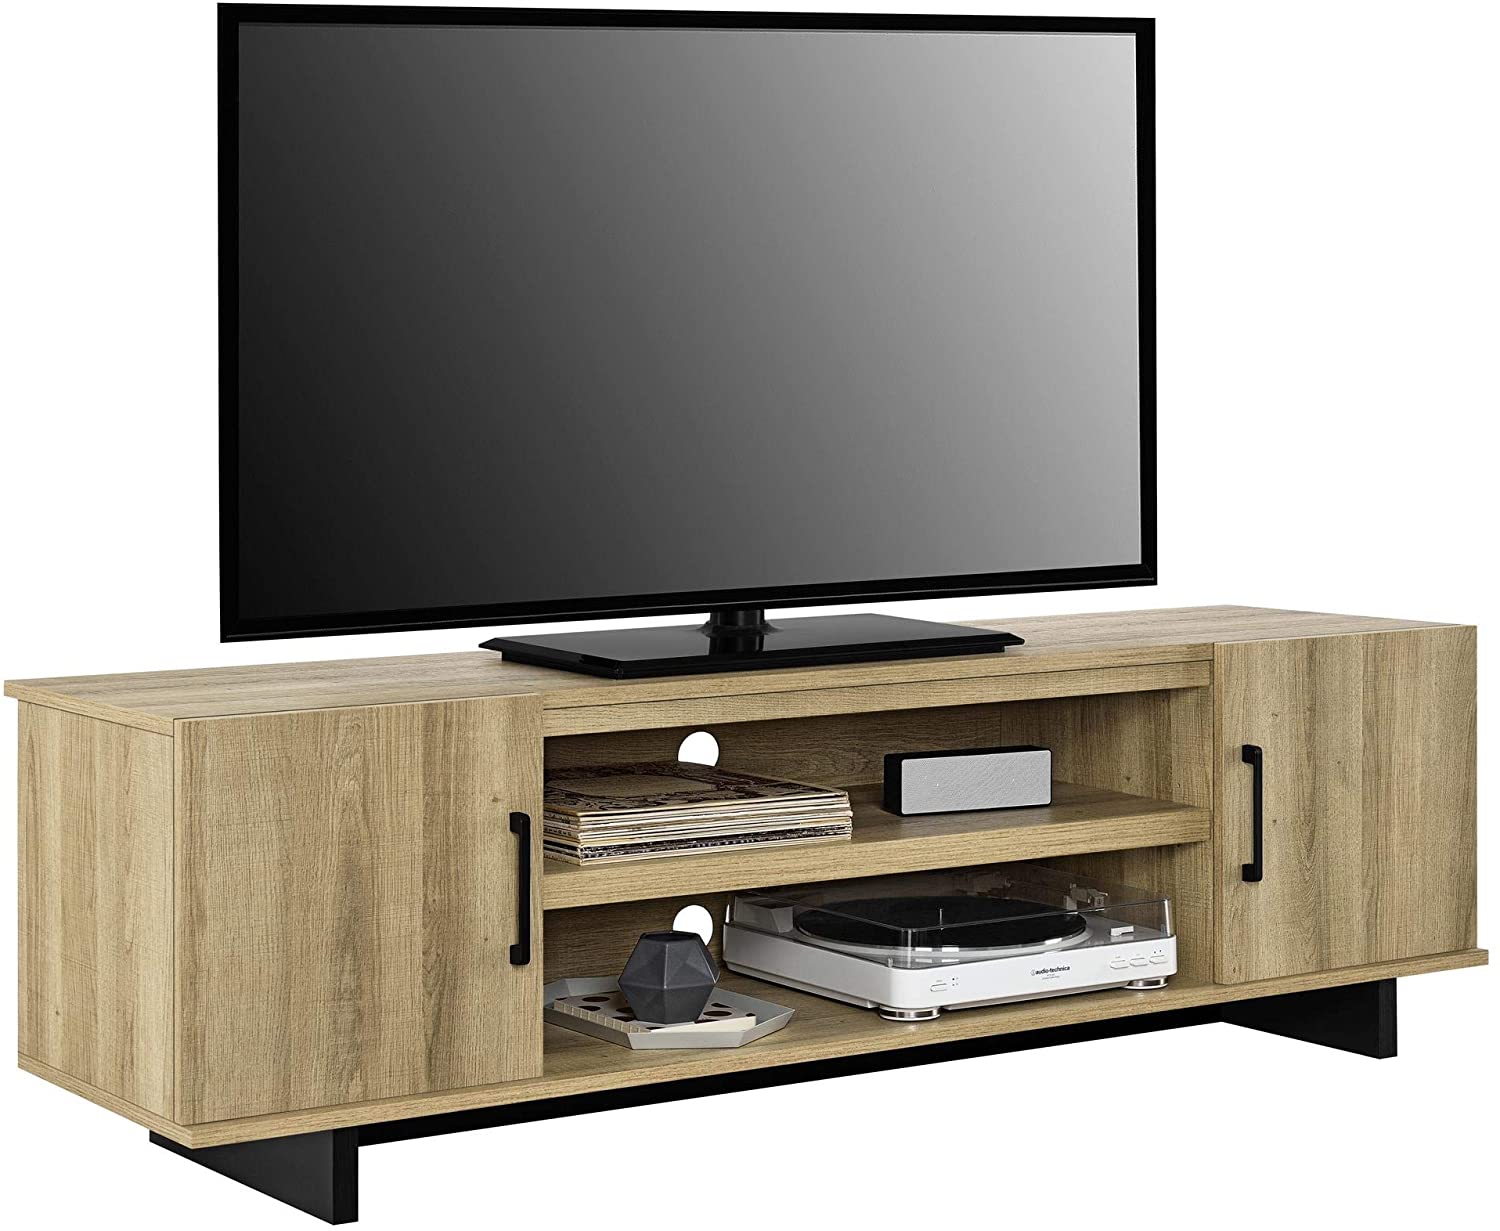 Ameriwood Home Southlander TV Stand for TVs up to 65" (Weathered Oak) $70.45 + Free Shipping